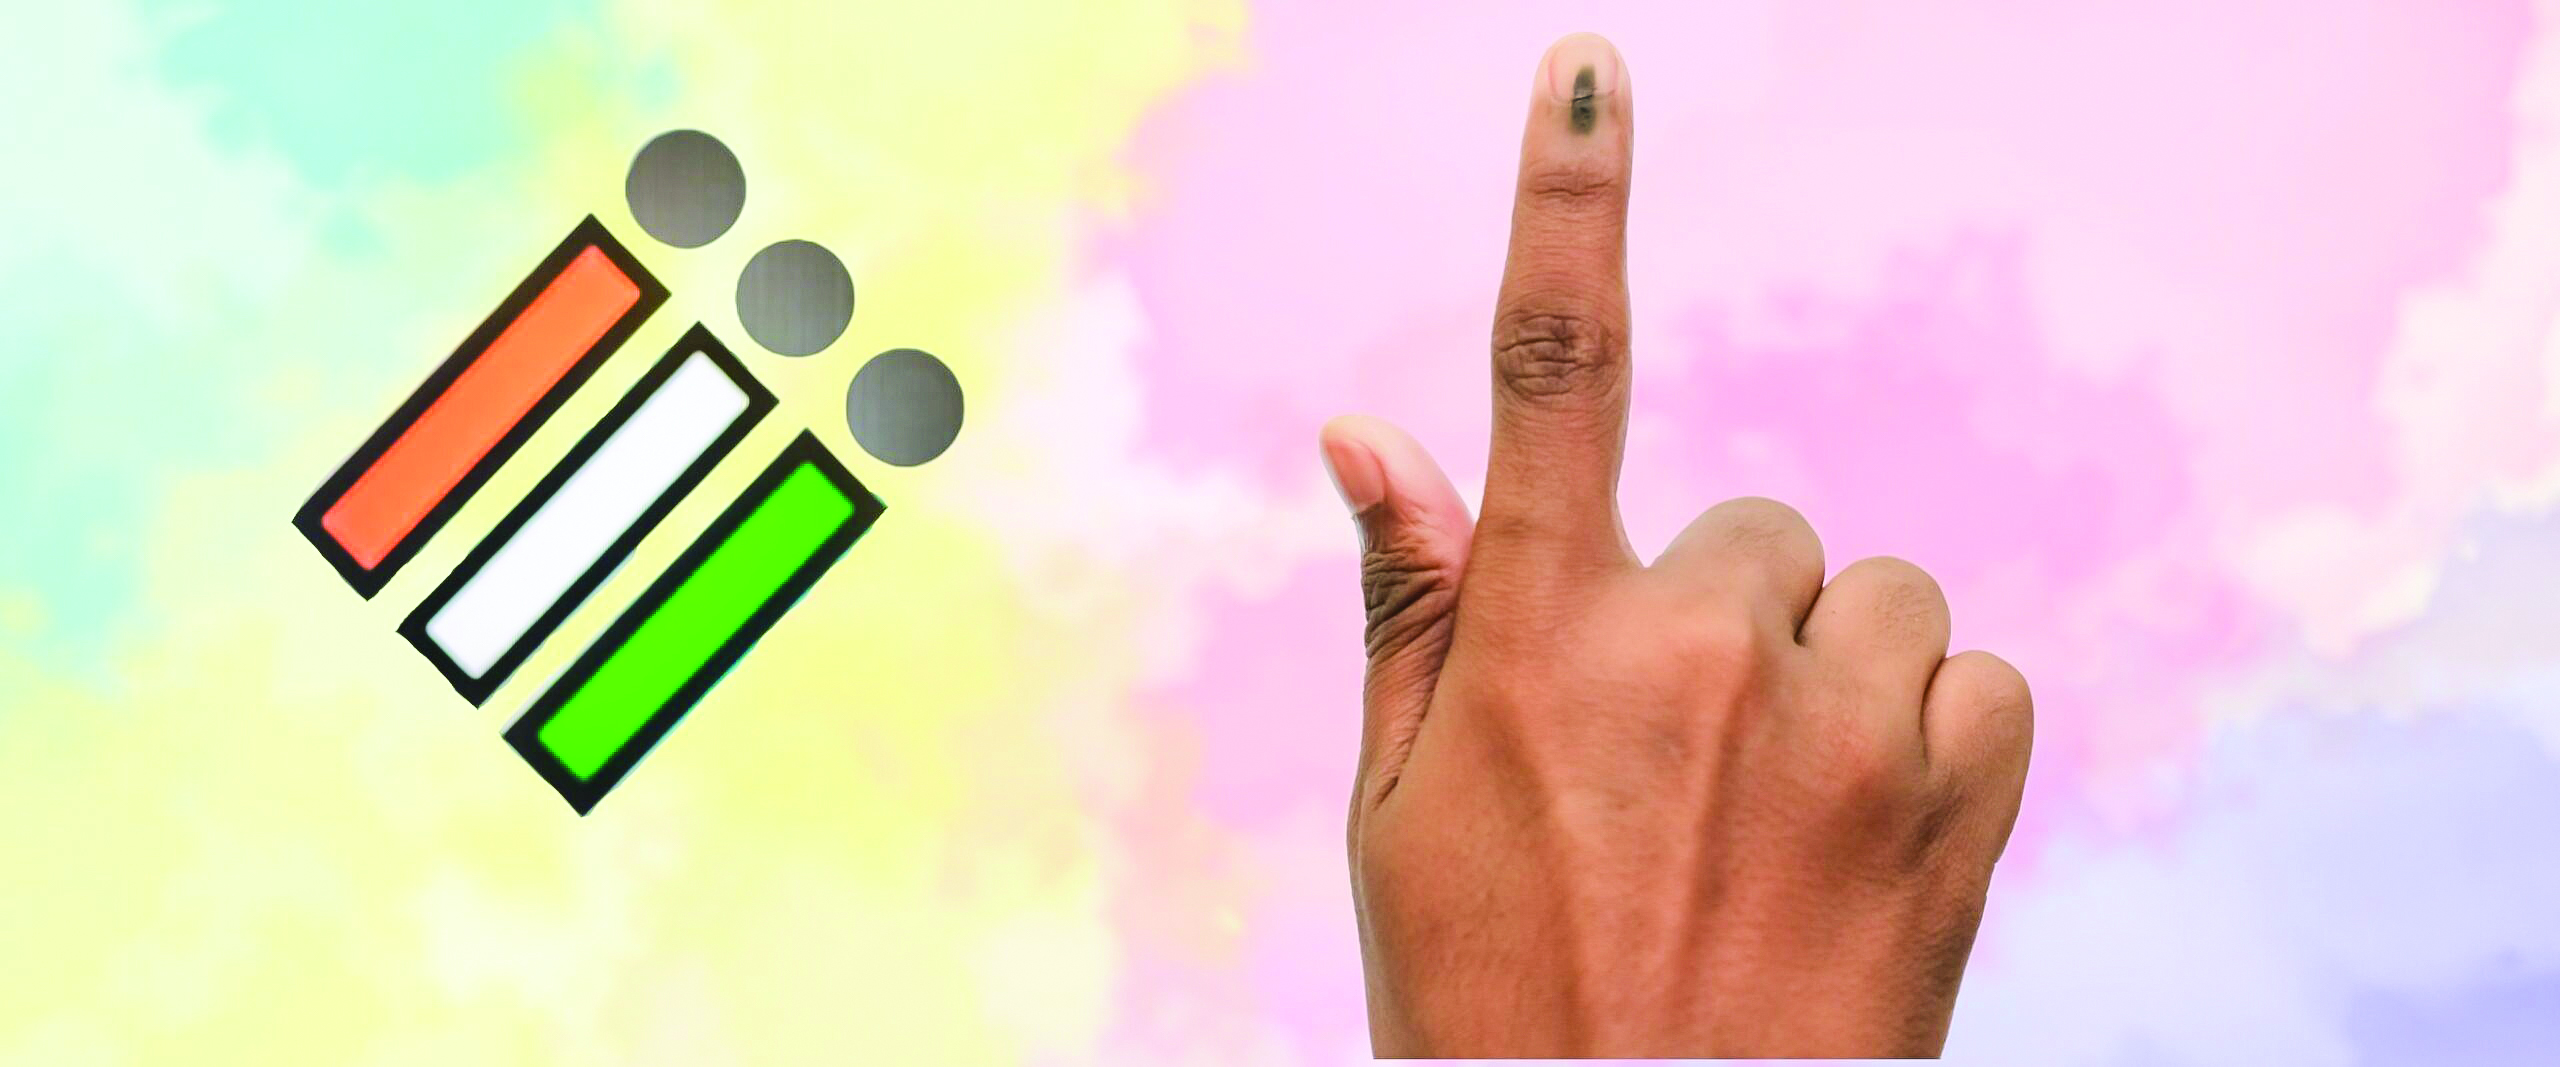 Udhampur parliamentary constituency gears up for general elections